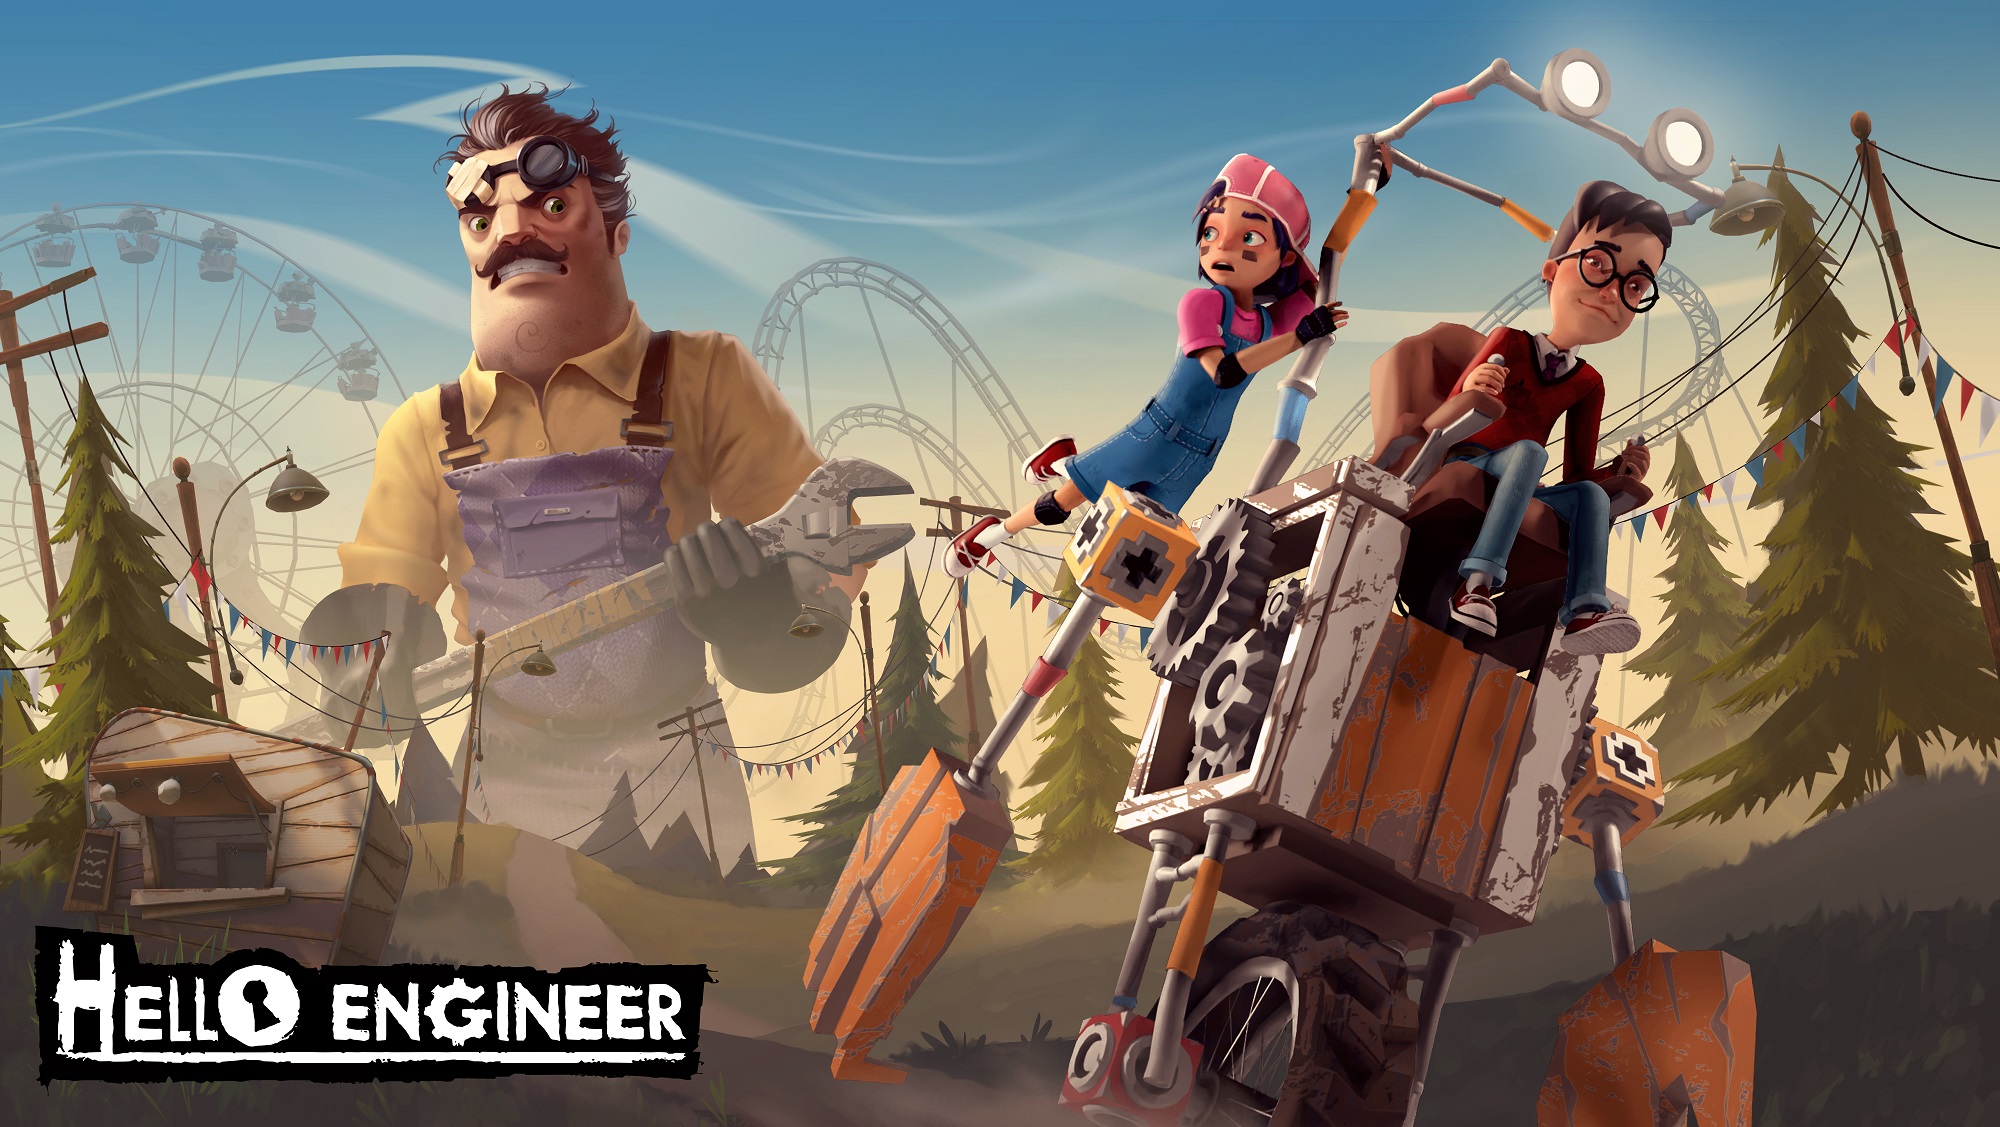 Hello Engineer is a crafting-racing-puzzler set in the Hello Neighbor universe